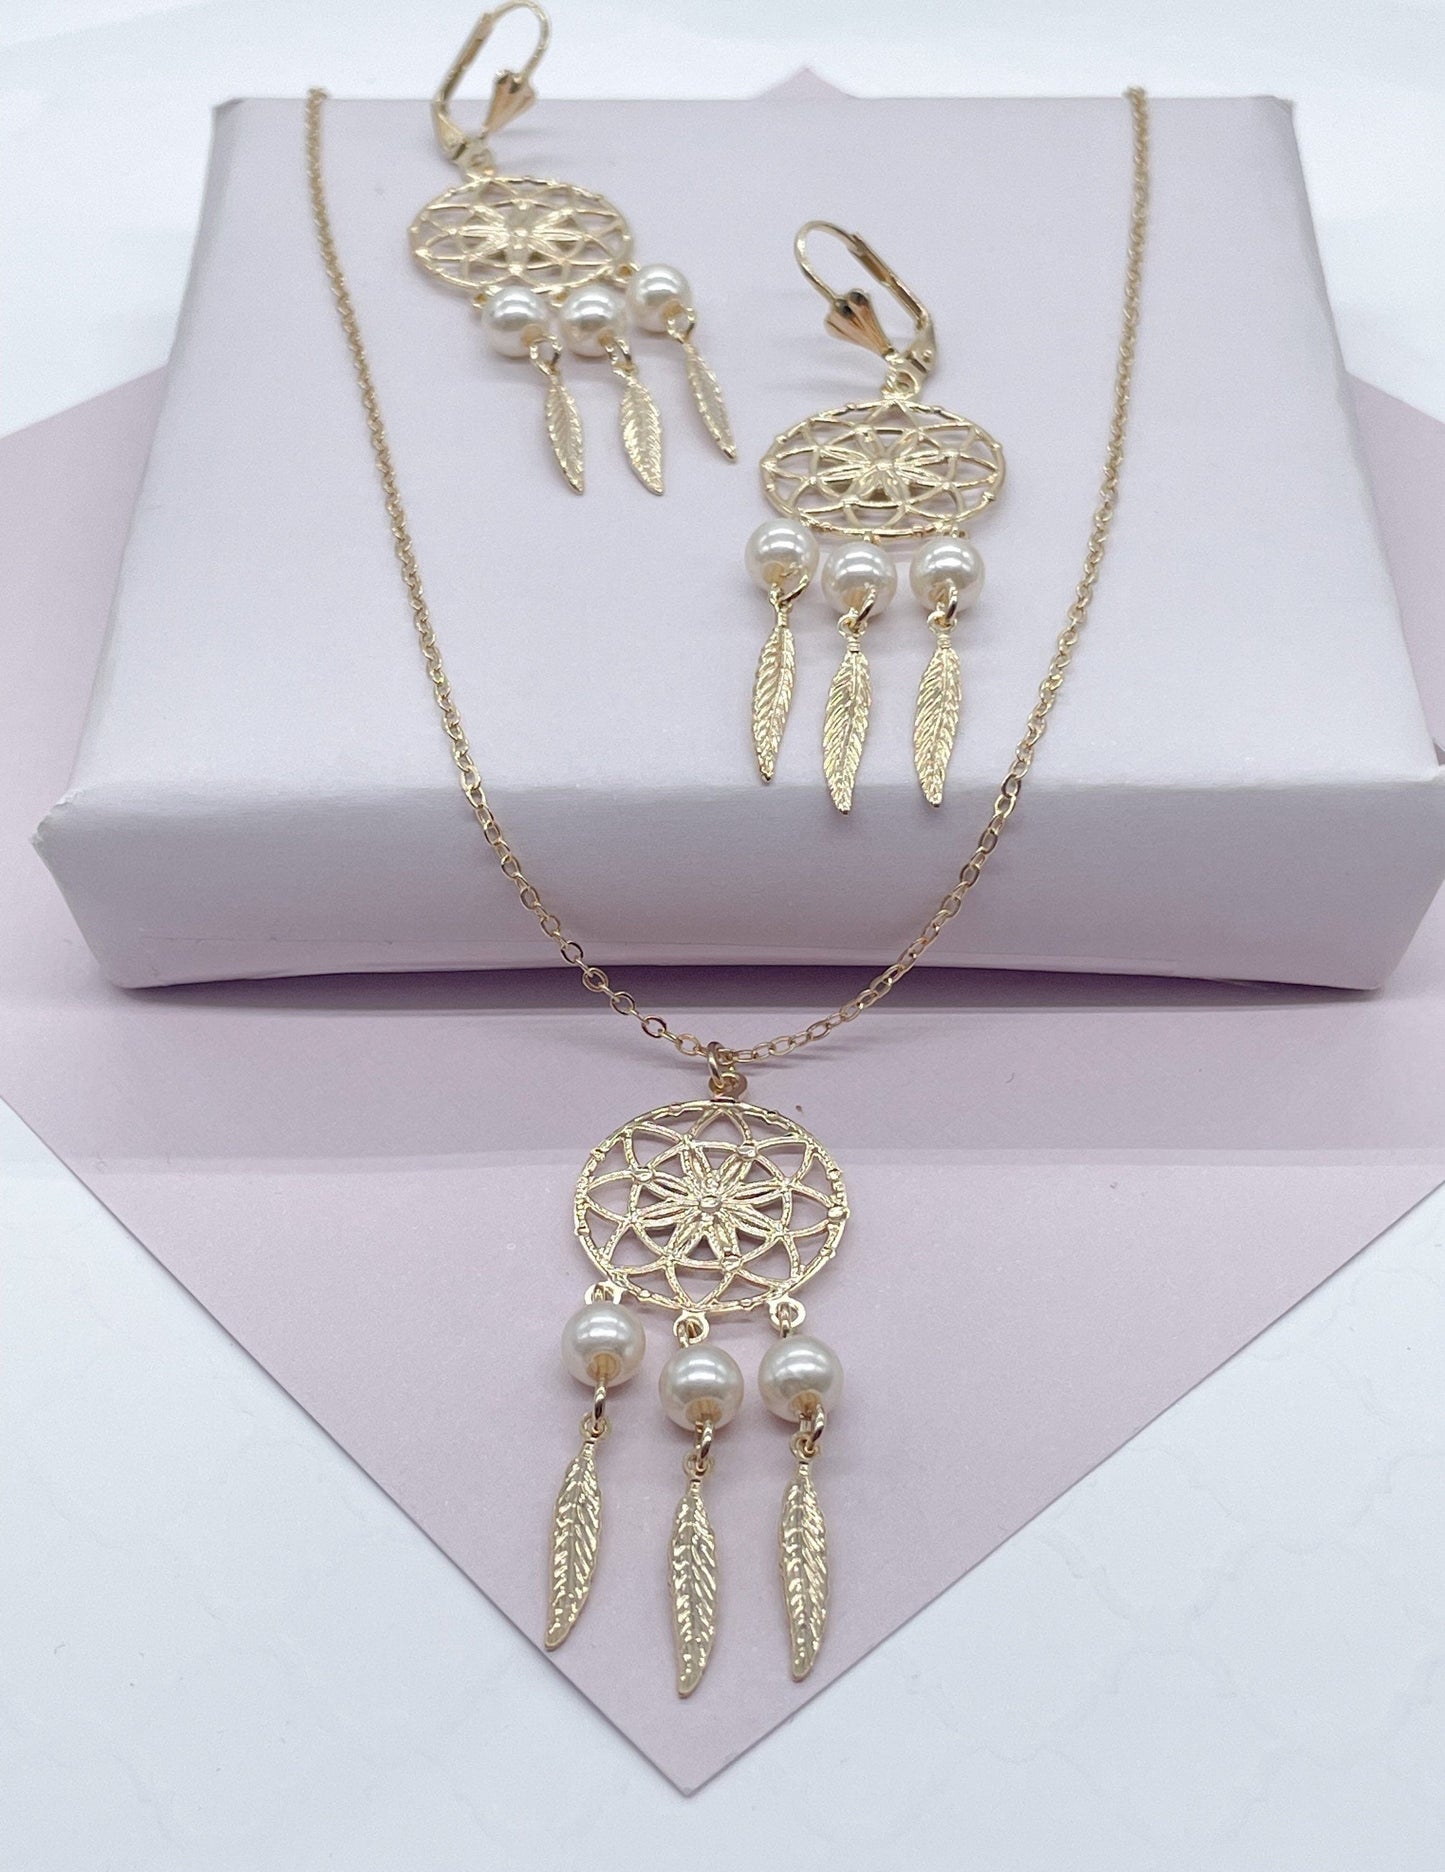 18k Gold Layered Dream Catcher Jewelry Set With Earrings And Necklace Featuring